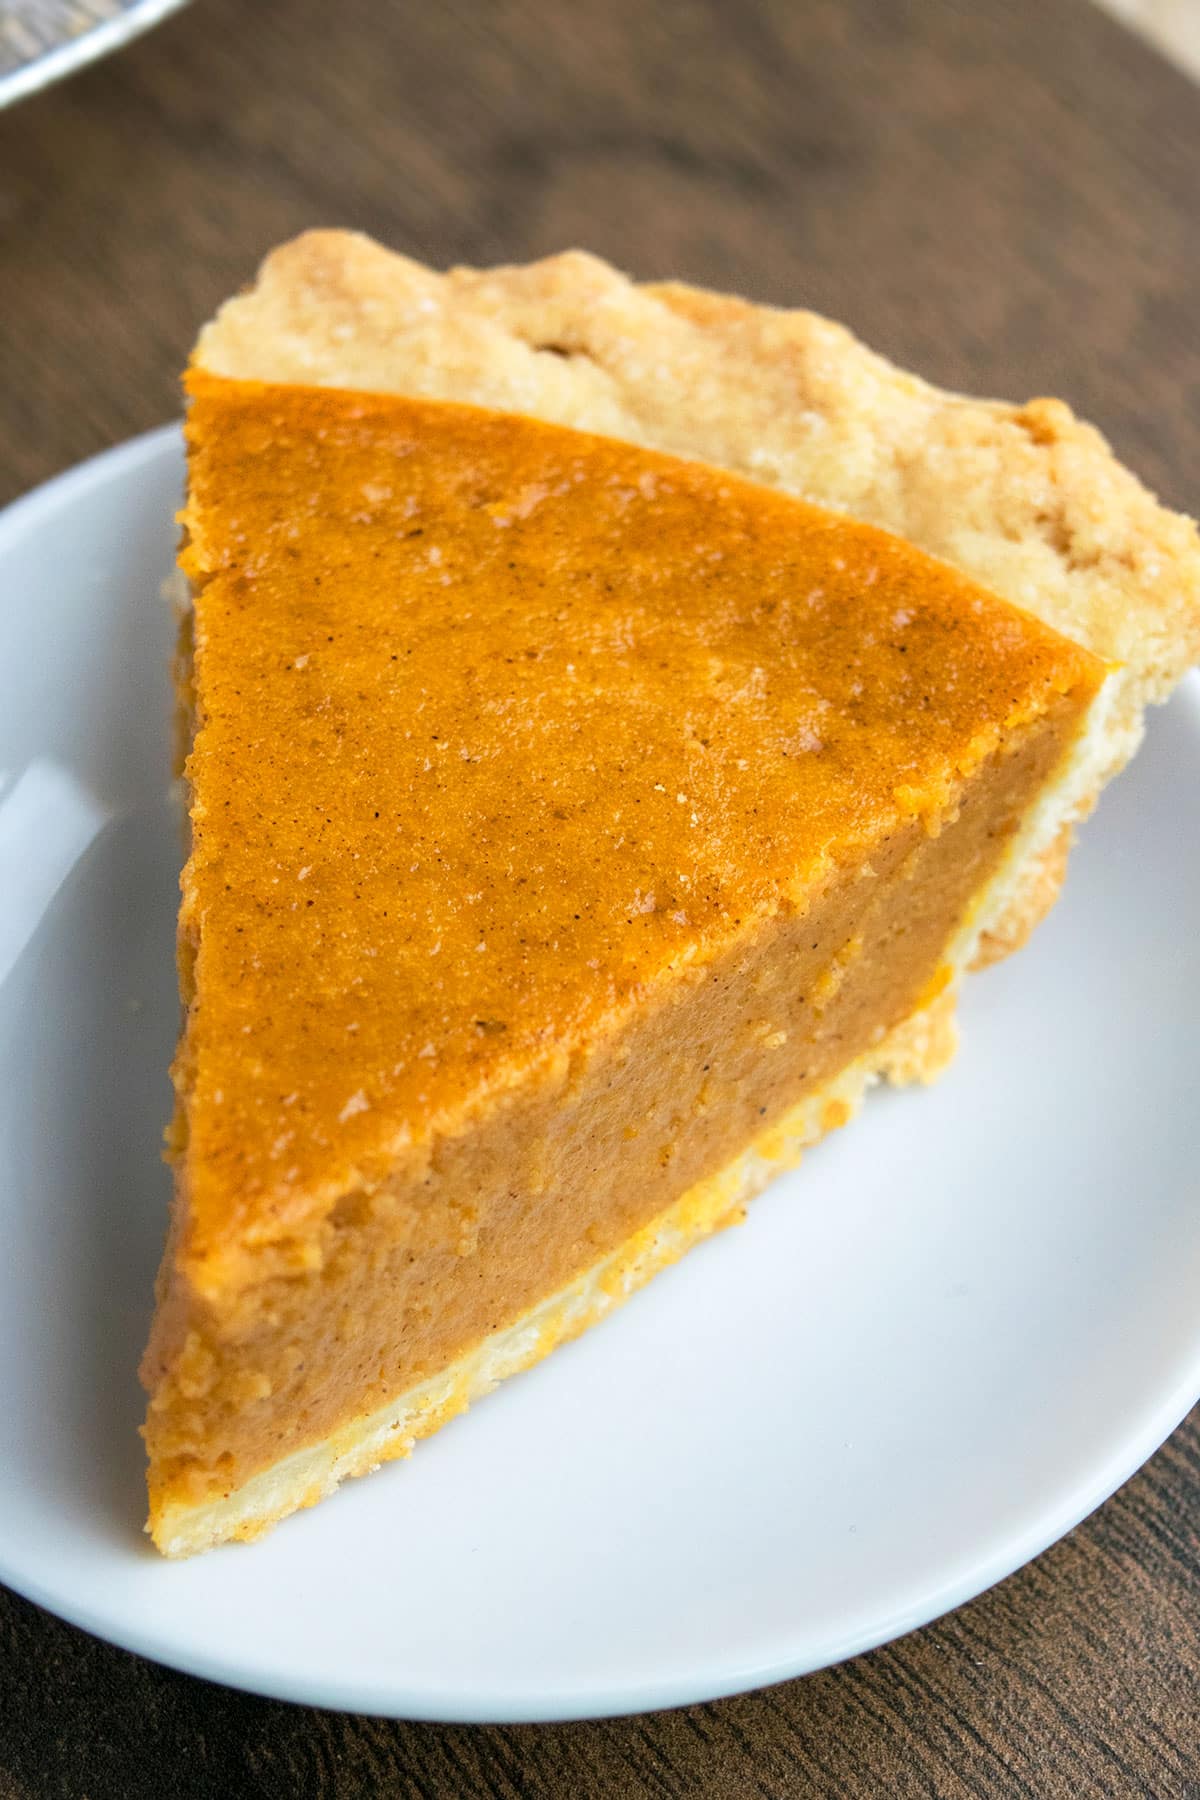 Easy Pumpkin Pie With Flaky Butter Pie Crust on White Dish.